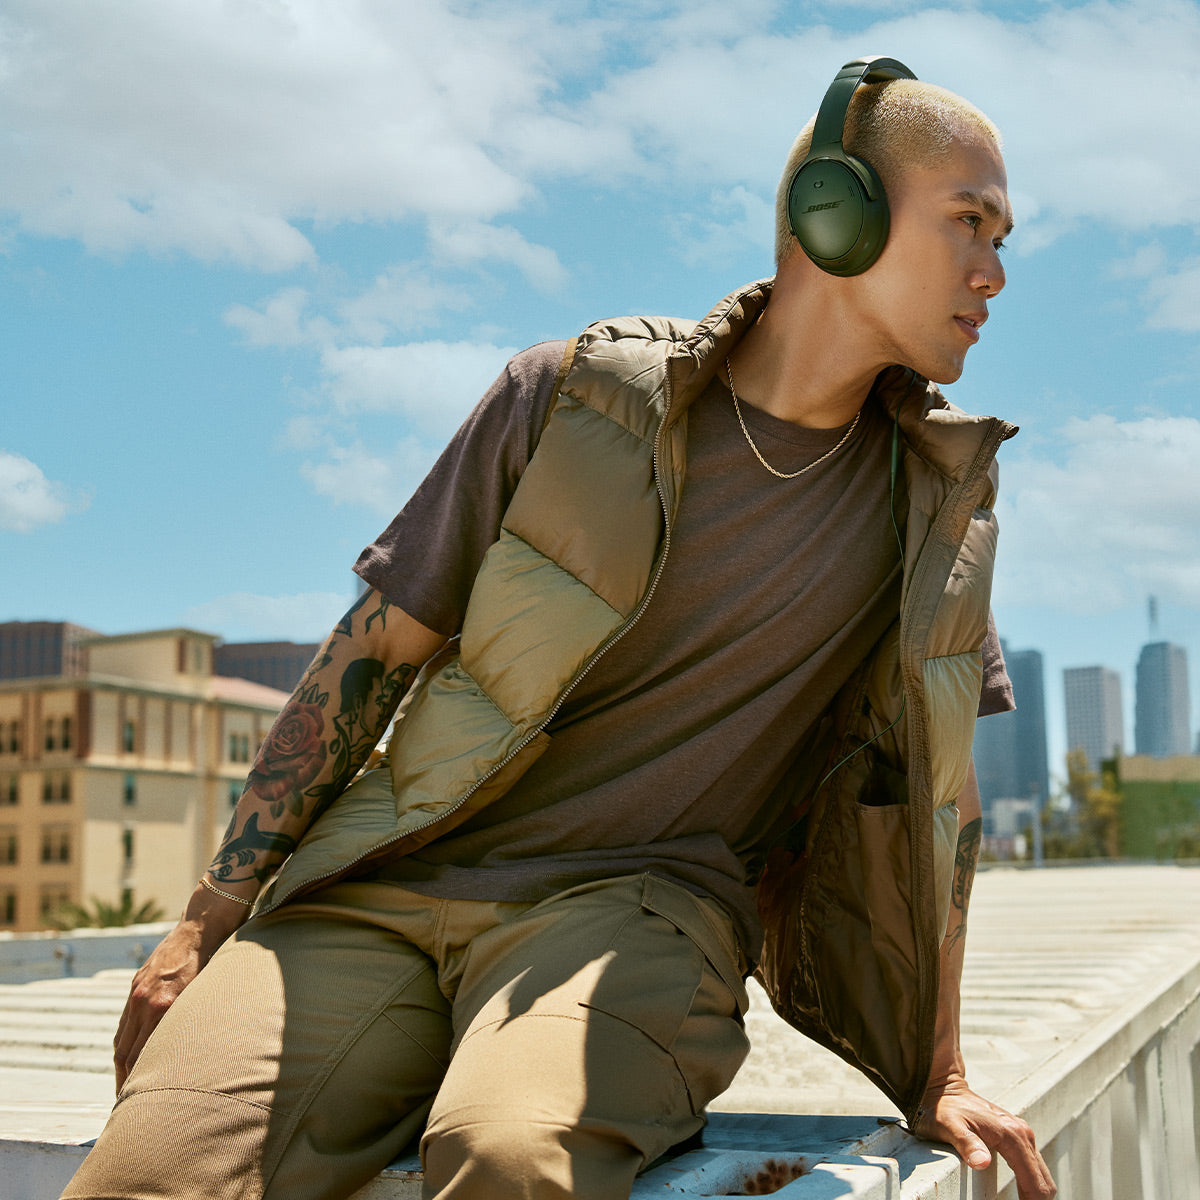 Bose QuietComfort Headphones with Active Noise Cancellation (Cypress Green)